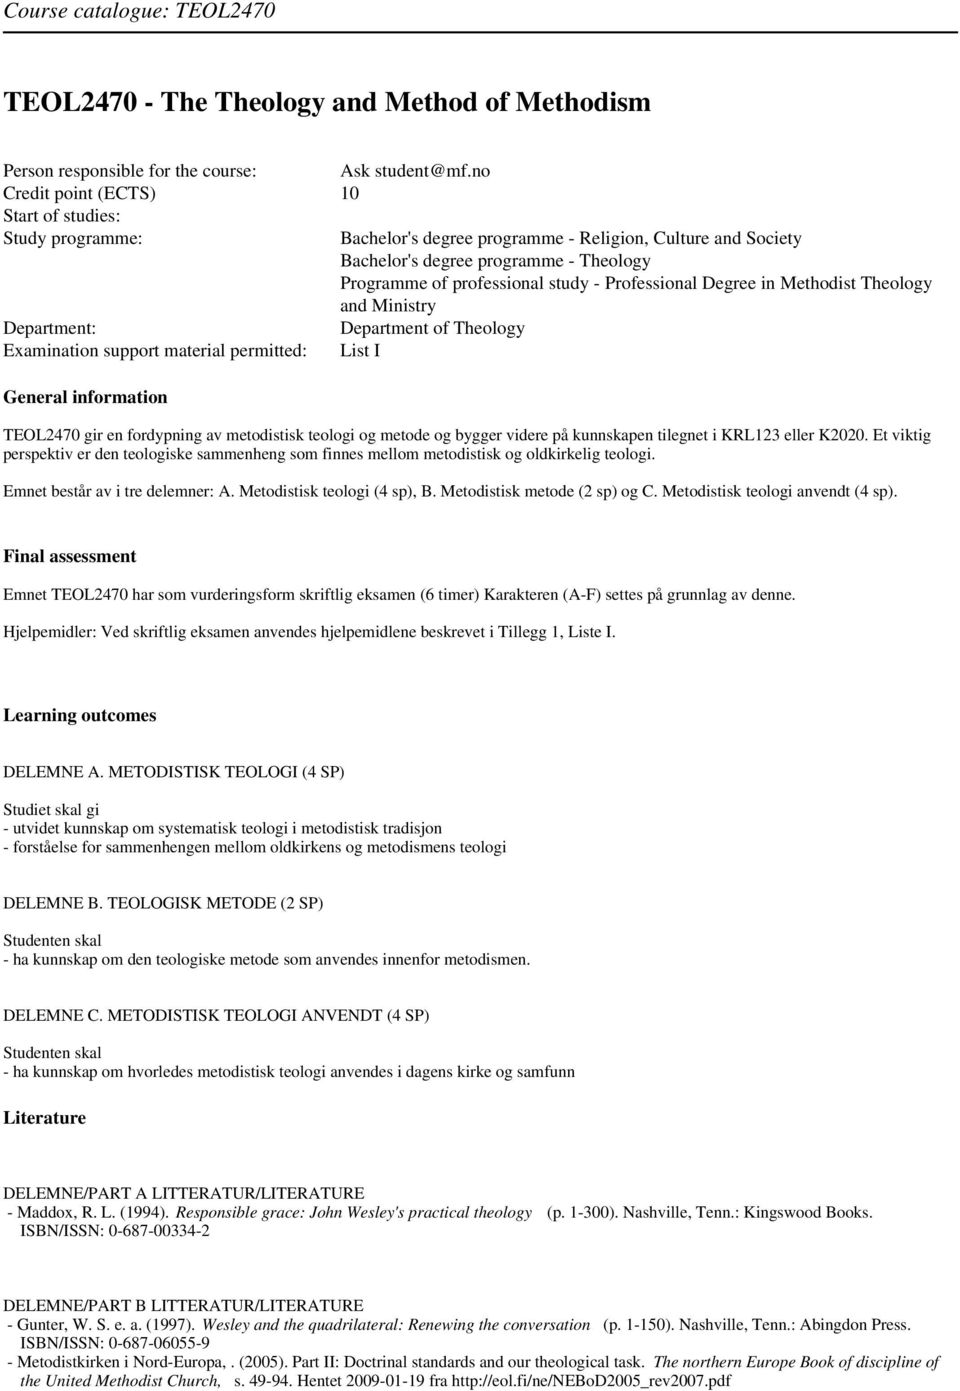 Professional Degree in Methodist Theology and Ministry Department: Department of Theology Examination support material permitted: List I General information TEOL2470 gir en fordypning av metodistisk